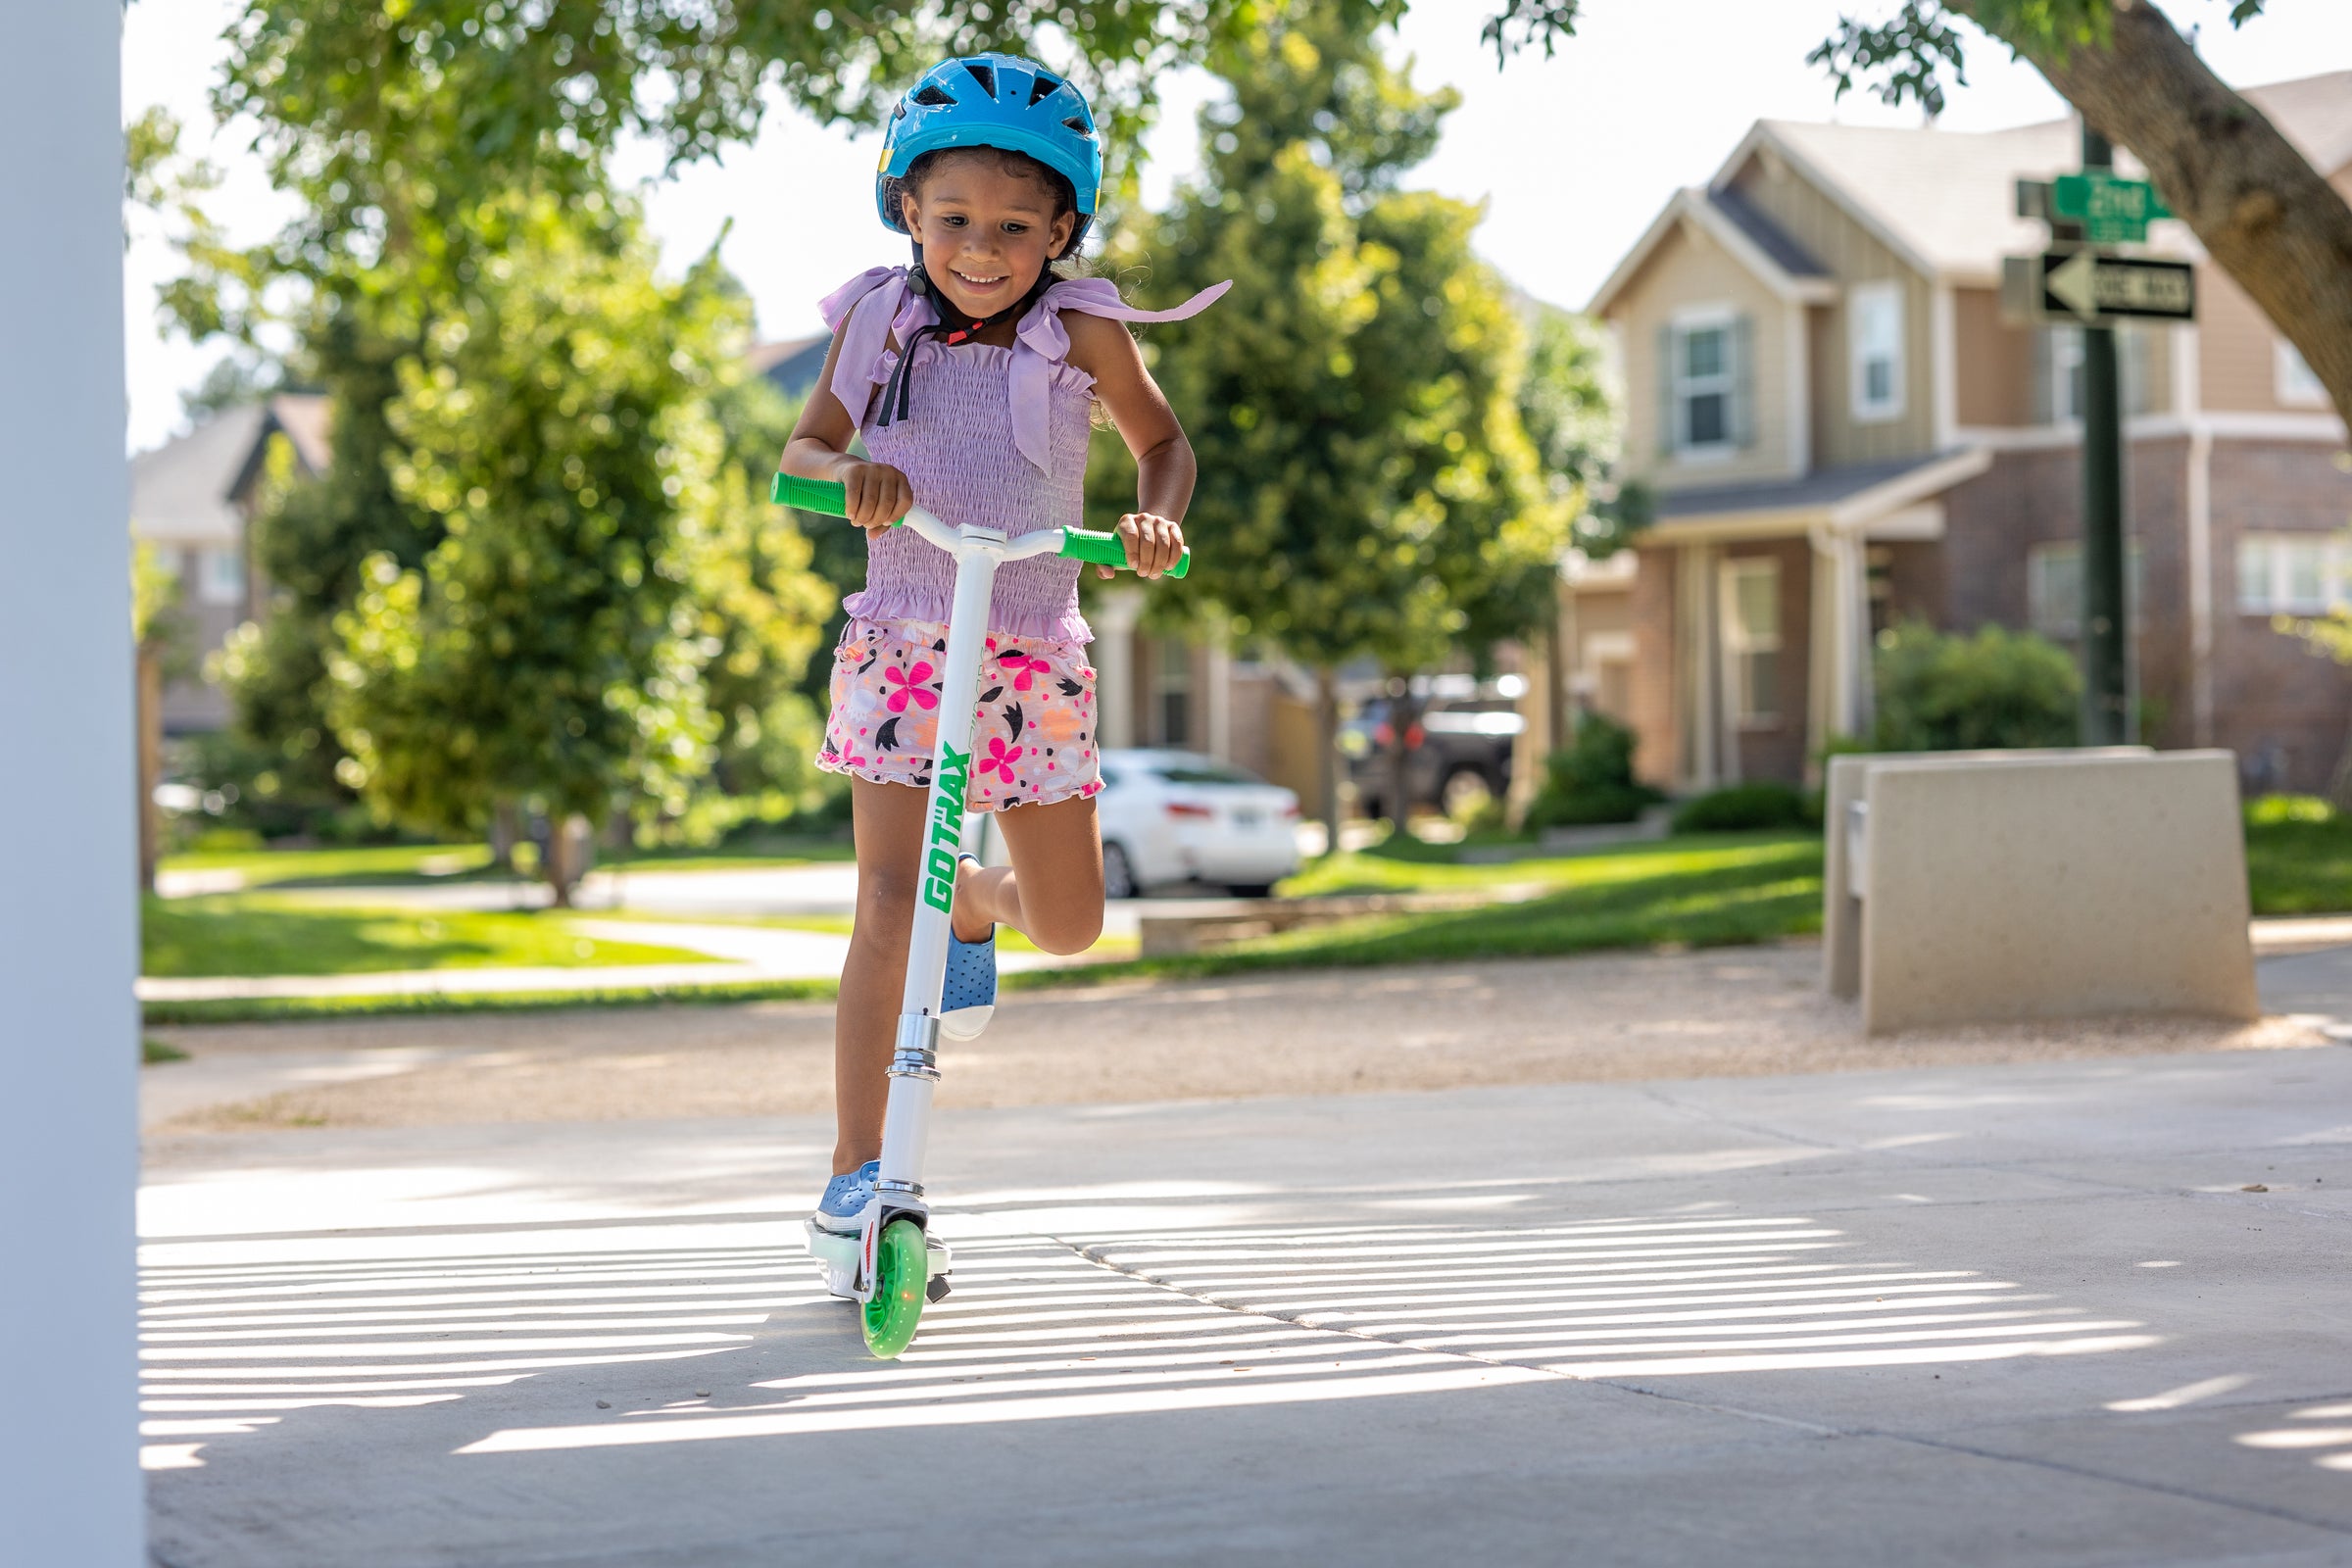 Young Child riding a GOTRAX Green Scout Electric Scooter for Kids with LED Deckboard